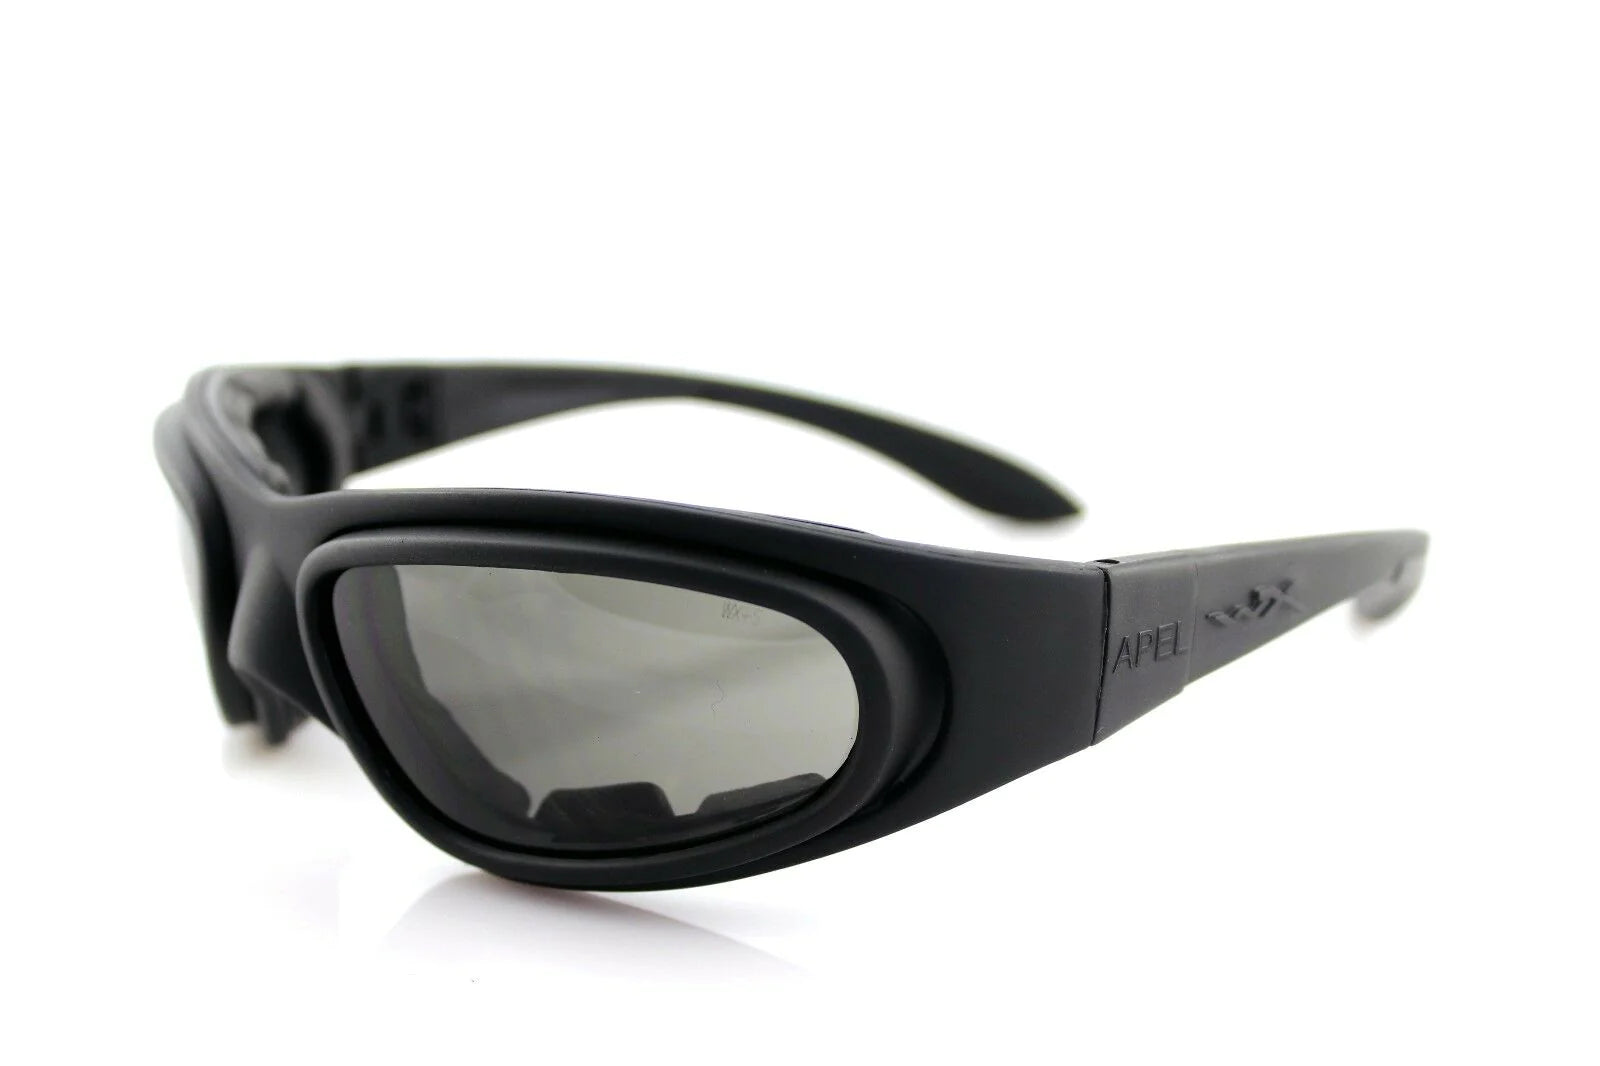 Wiley X SG1 Goggles Sunglasses Two Lens Black Frame